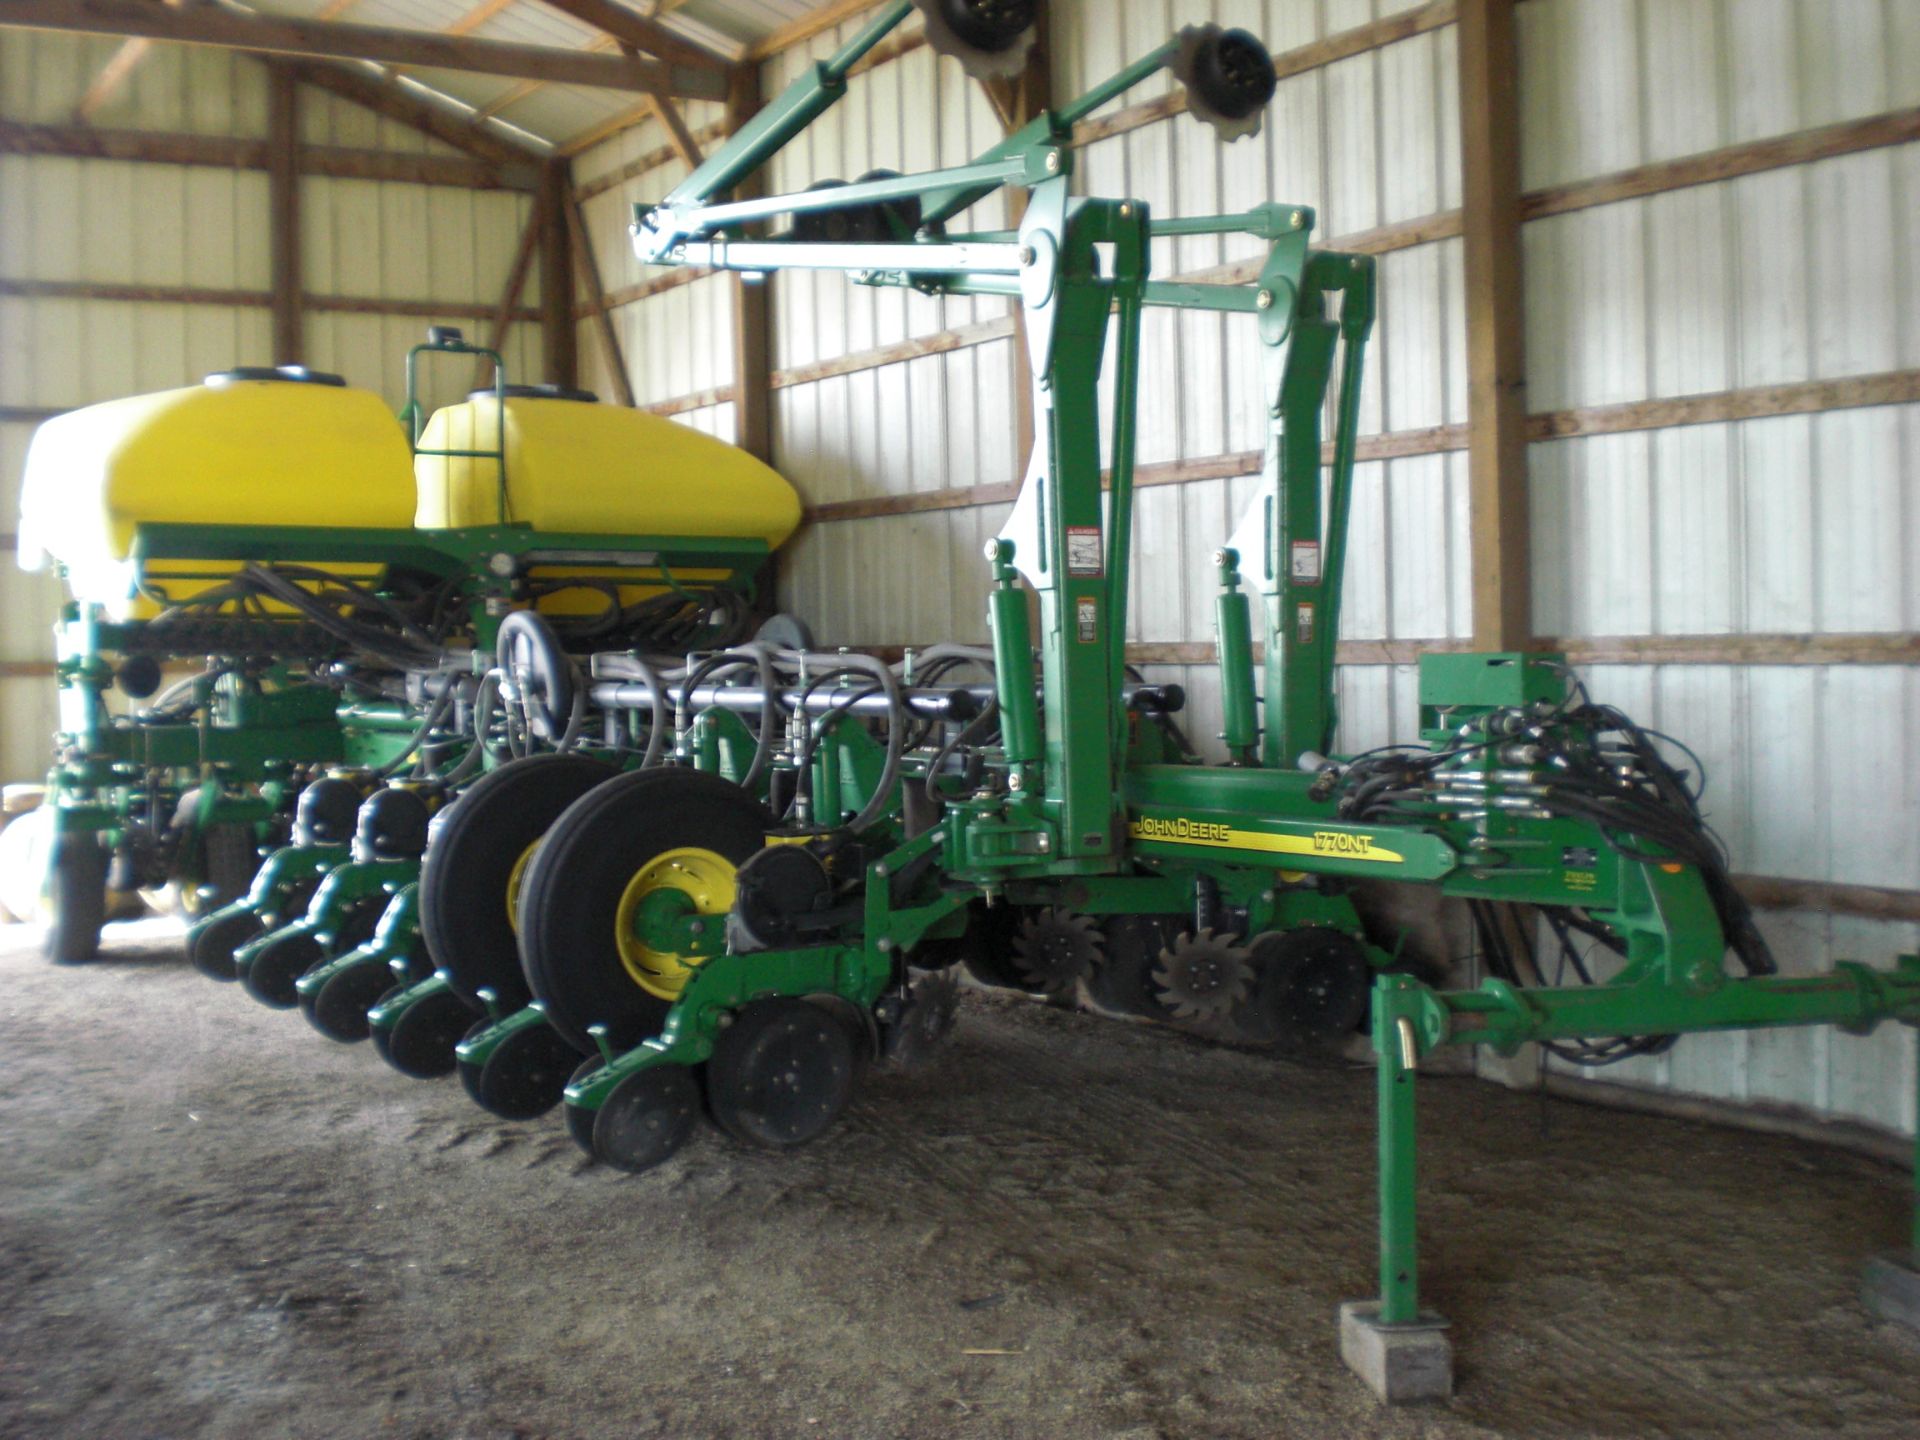 PLANTER 2011 JD 1770 N Till 16-30” CCS Delivery, Pro Units, Shark Tooth trash whips, New chains, - Image 2 of 3